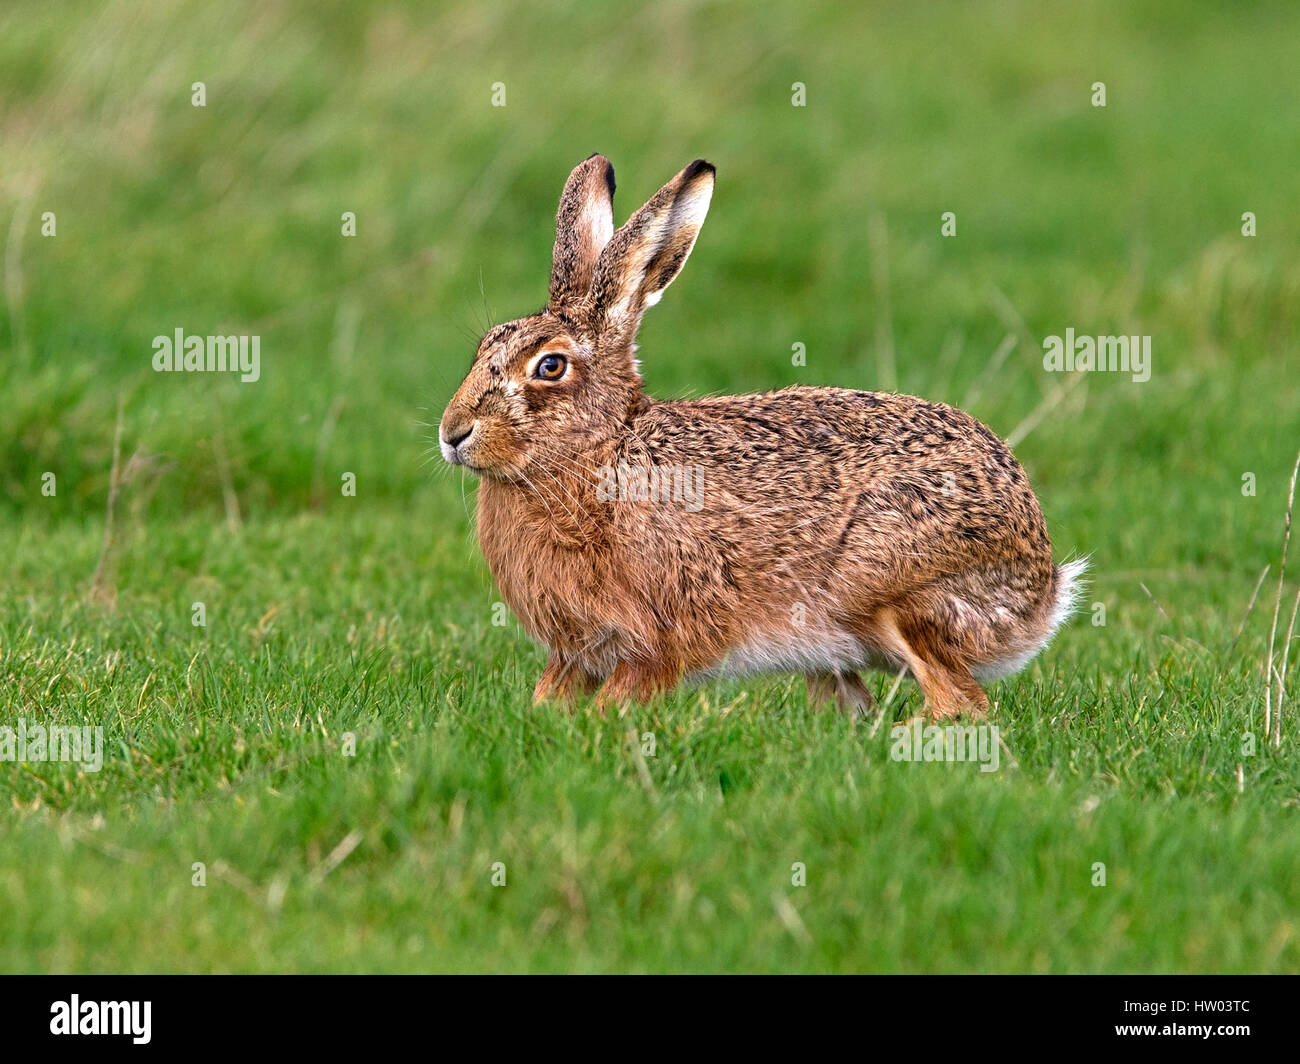 European brown hare standing Banque D'Images